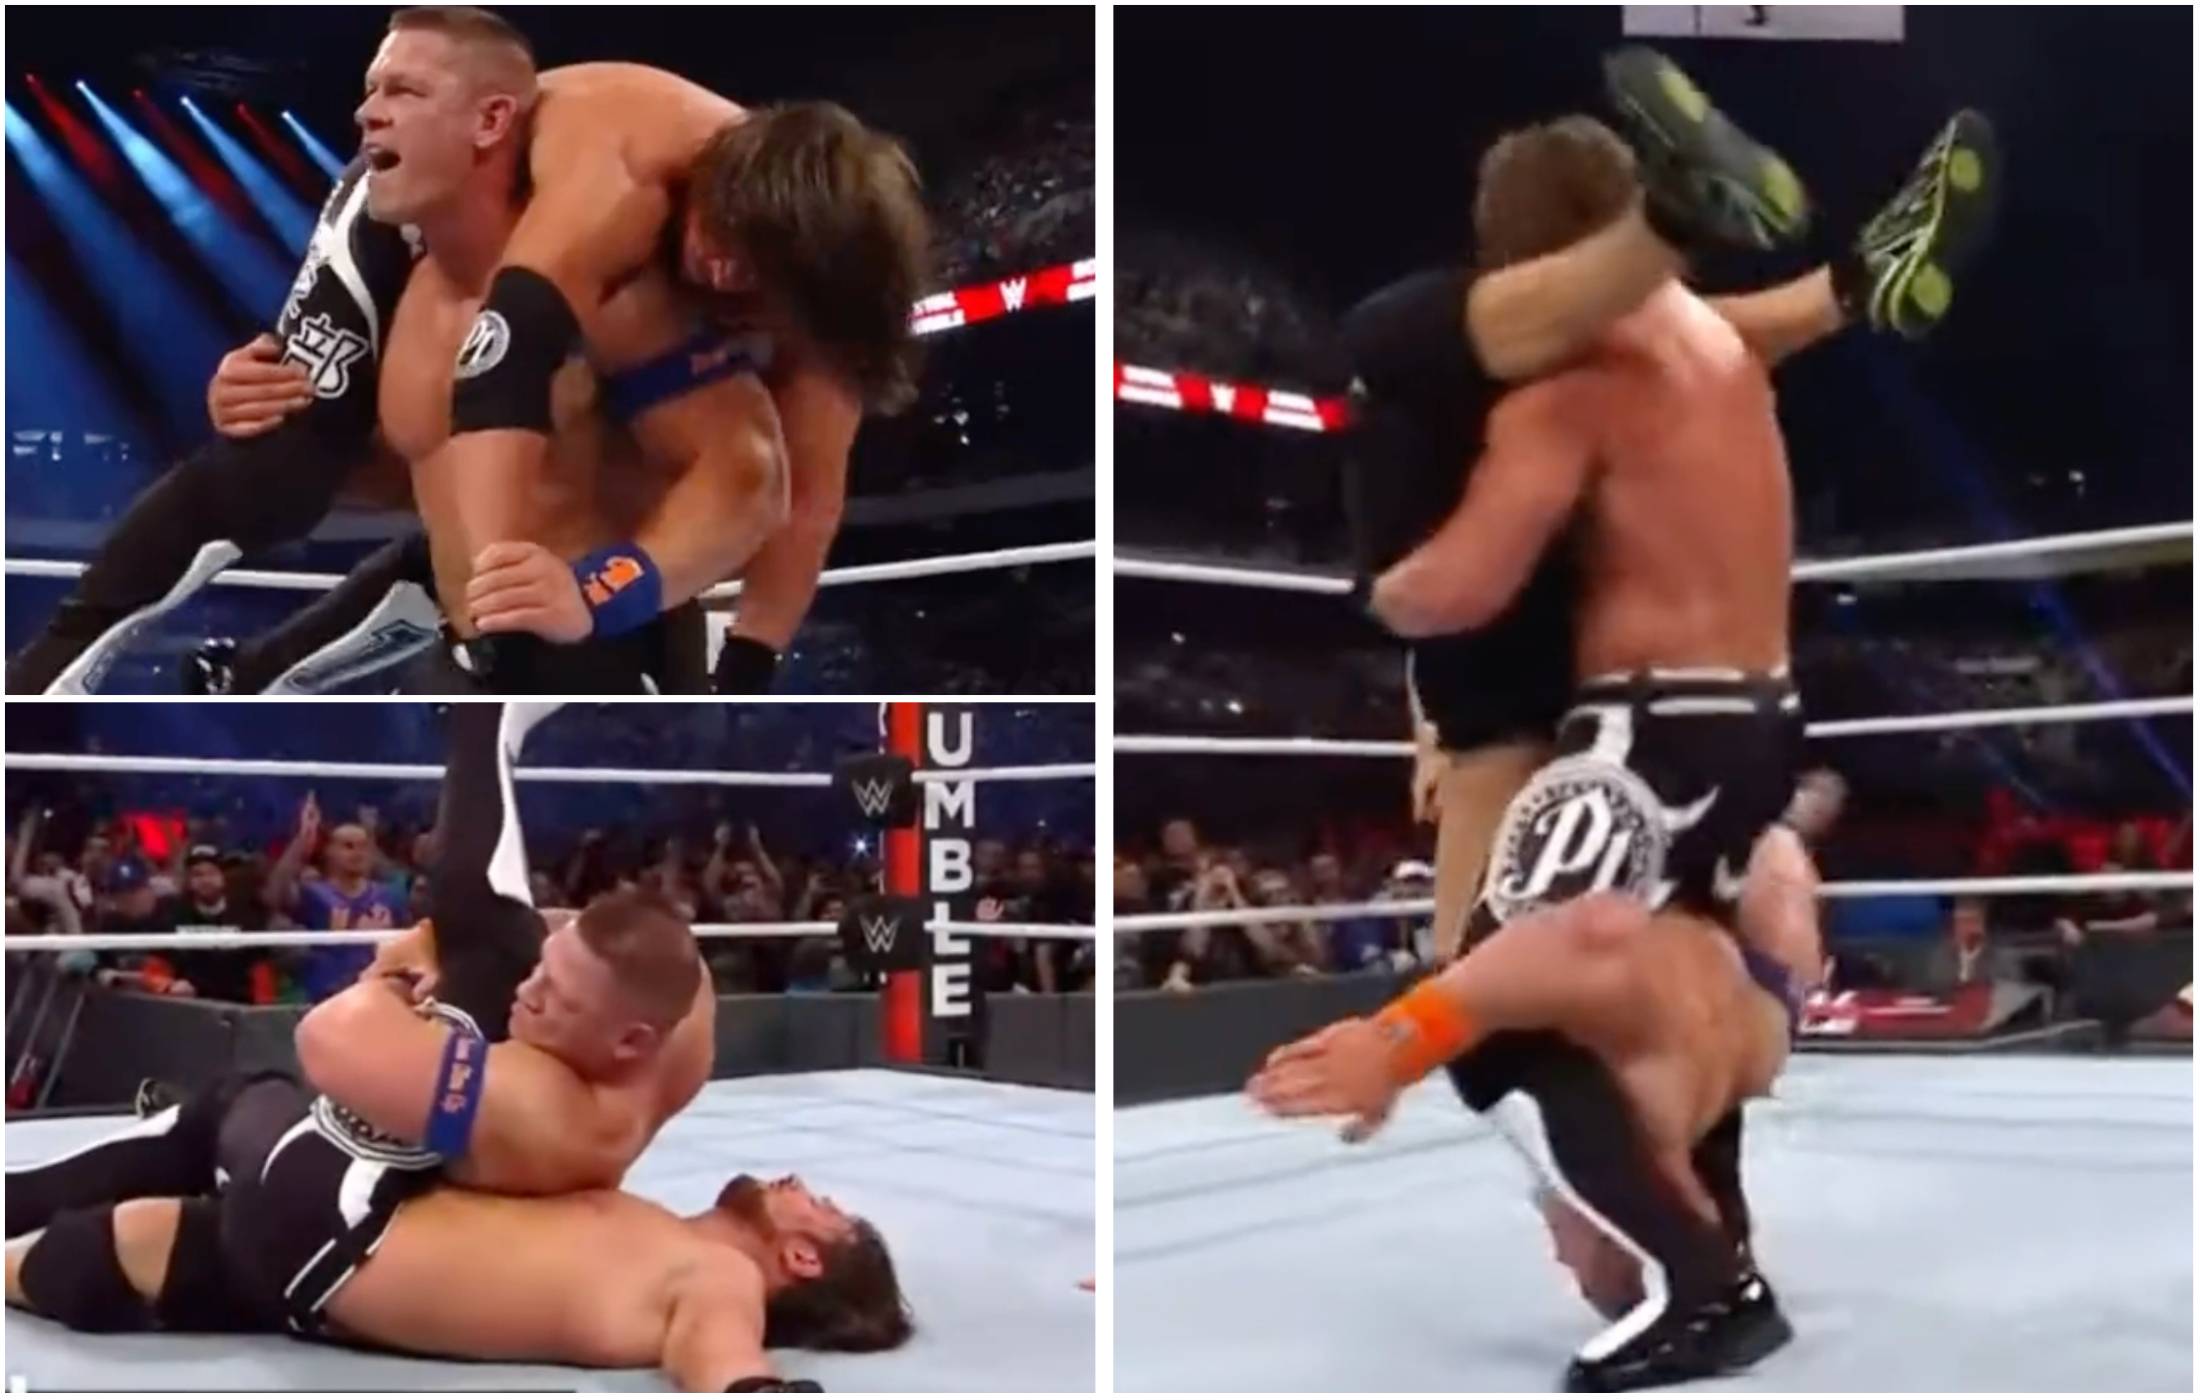 John Cena v AJ Styles is one of the most underrated WWE matches ever